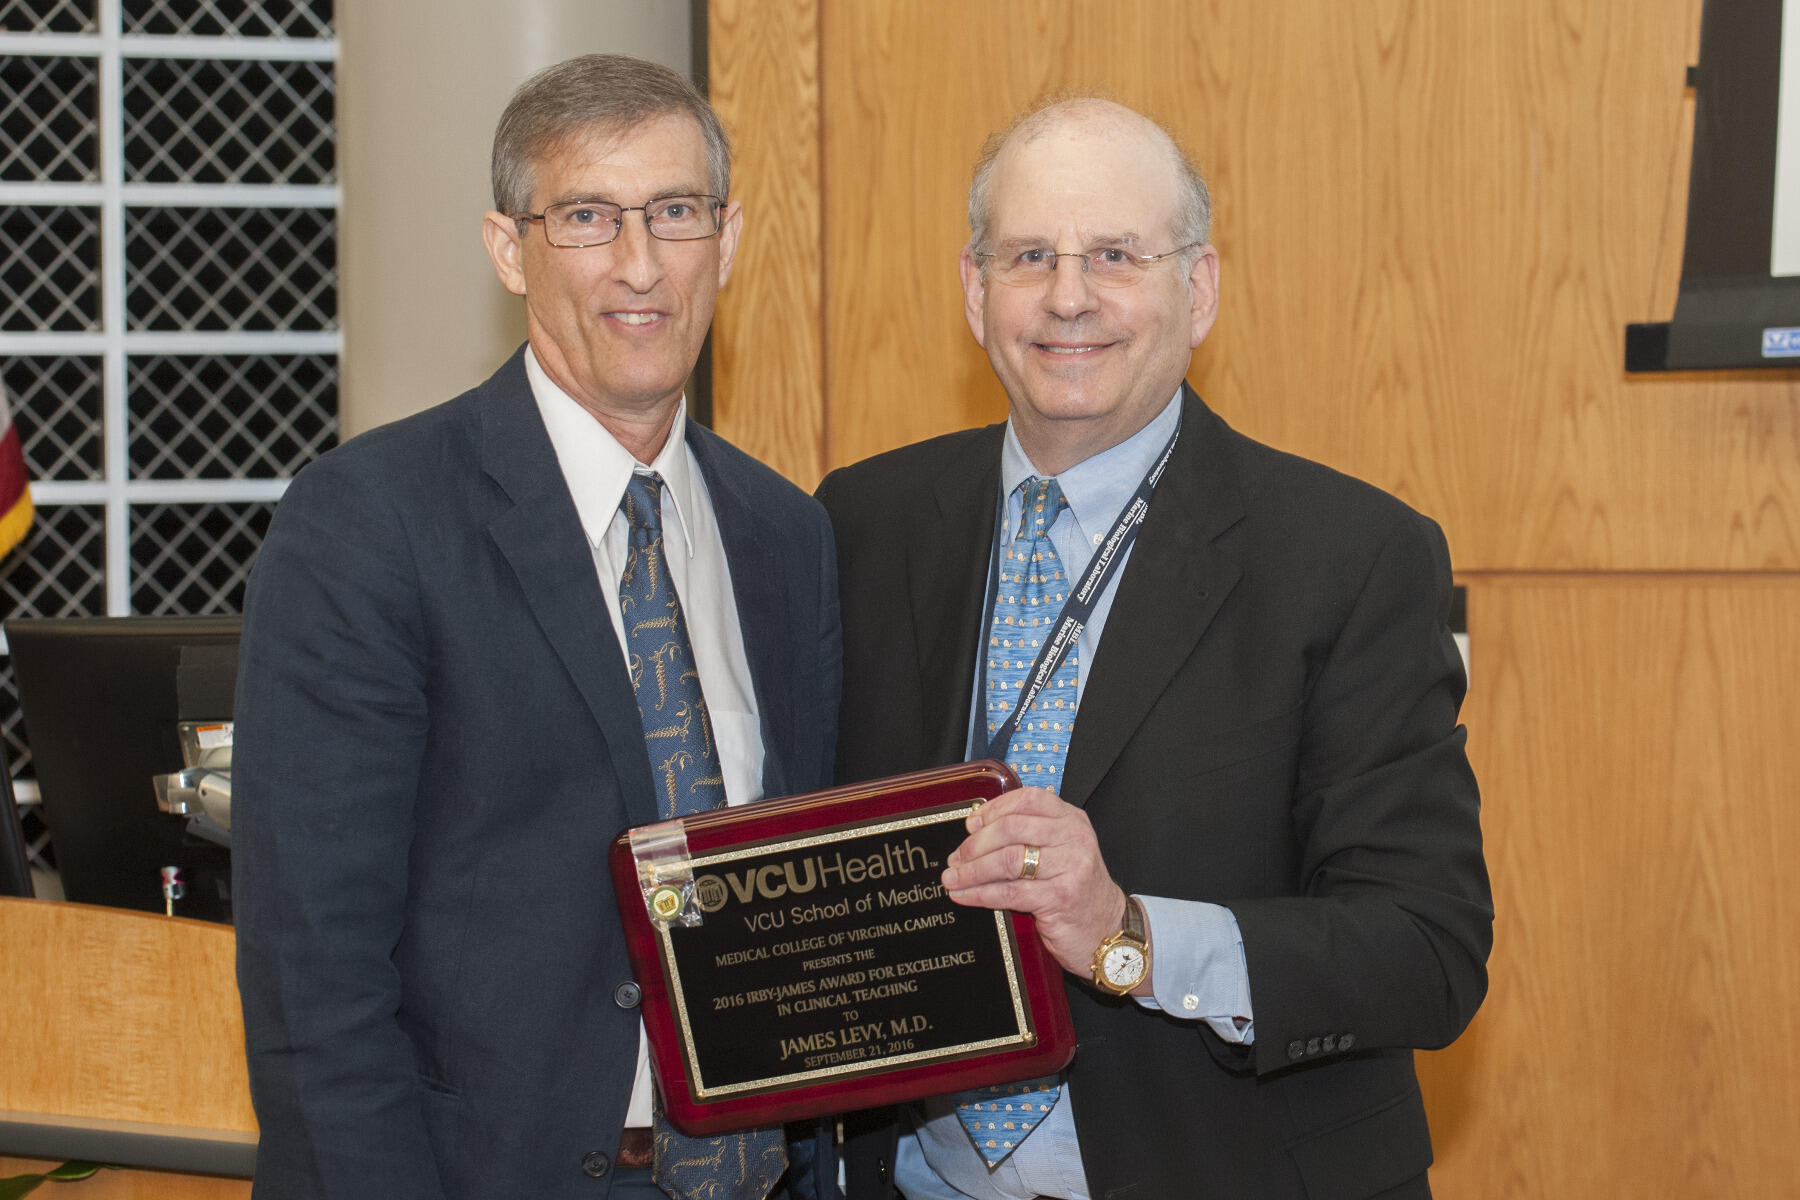 James Levy (left), M.D., professor in the Department of Internal Medicine, was one of this year’s recipients of the Irby-James Award for Excellence in Clinical Teaching, which recognizes superior teaching in clinical medicine. Jerome Strauss (right), M.D., Ph.D., dean of VCU School of Medicine, presented the award.